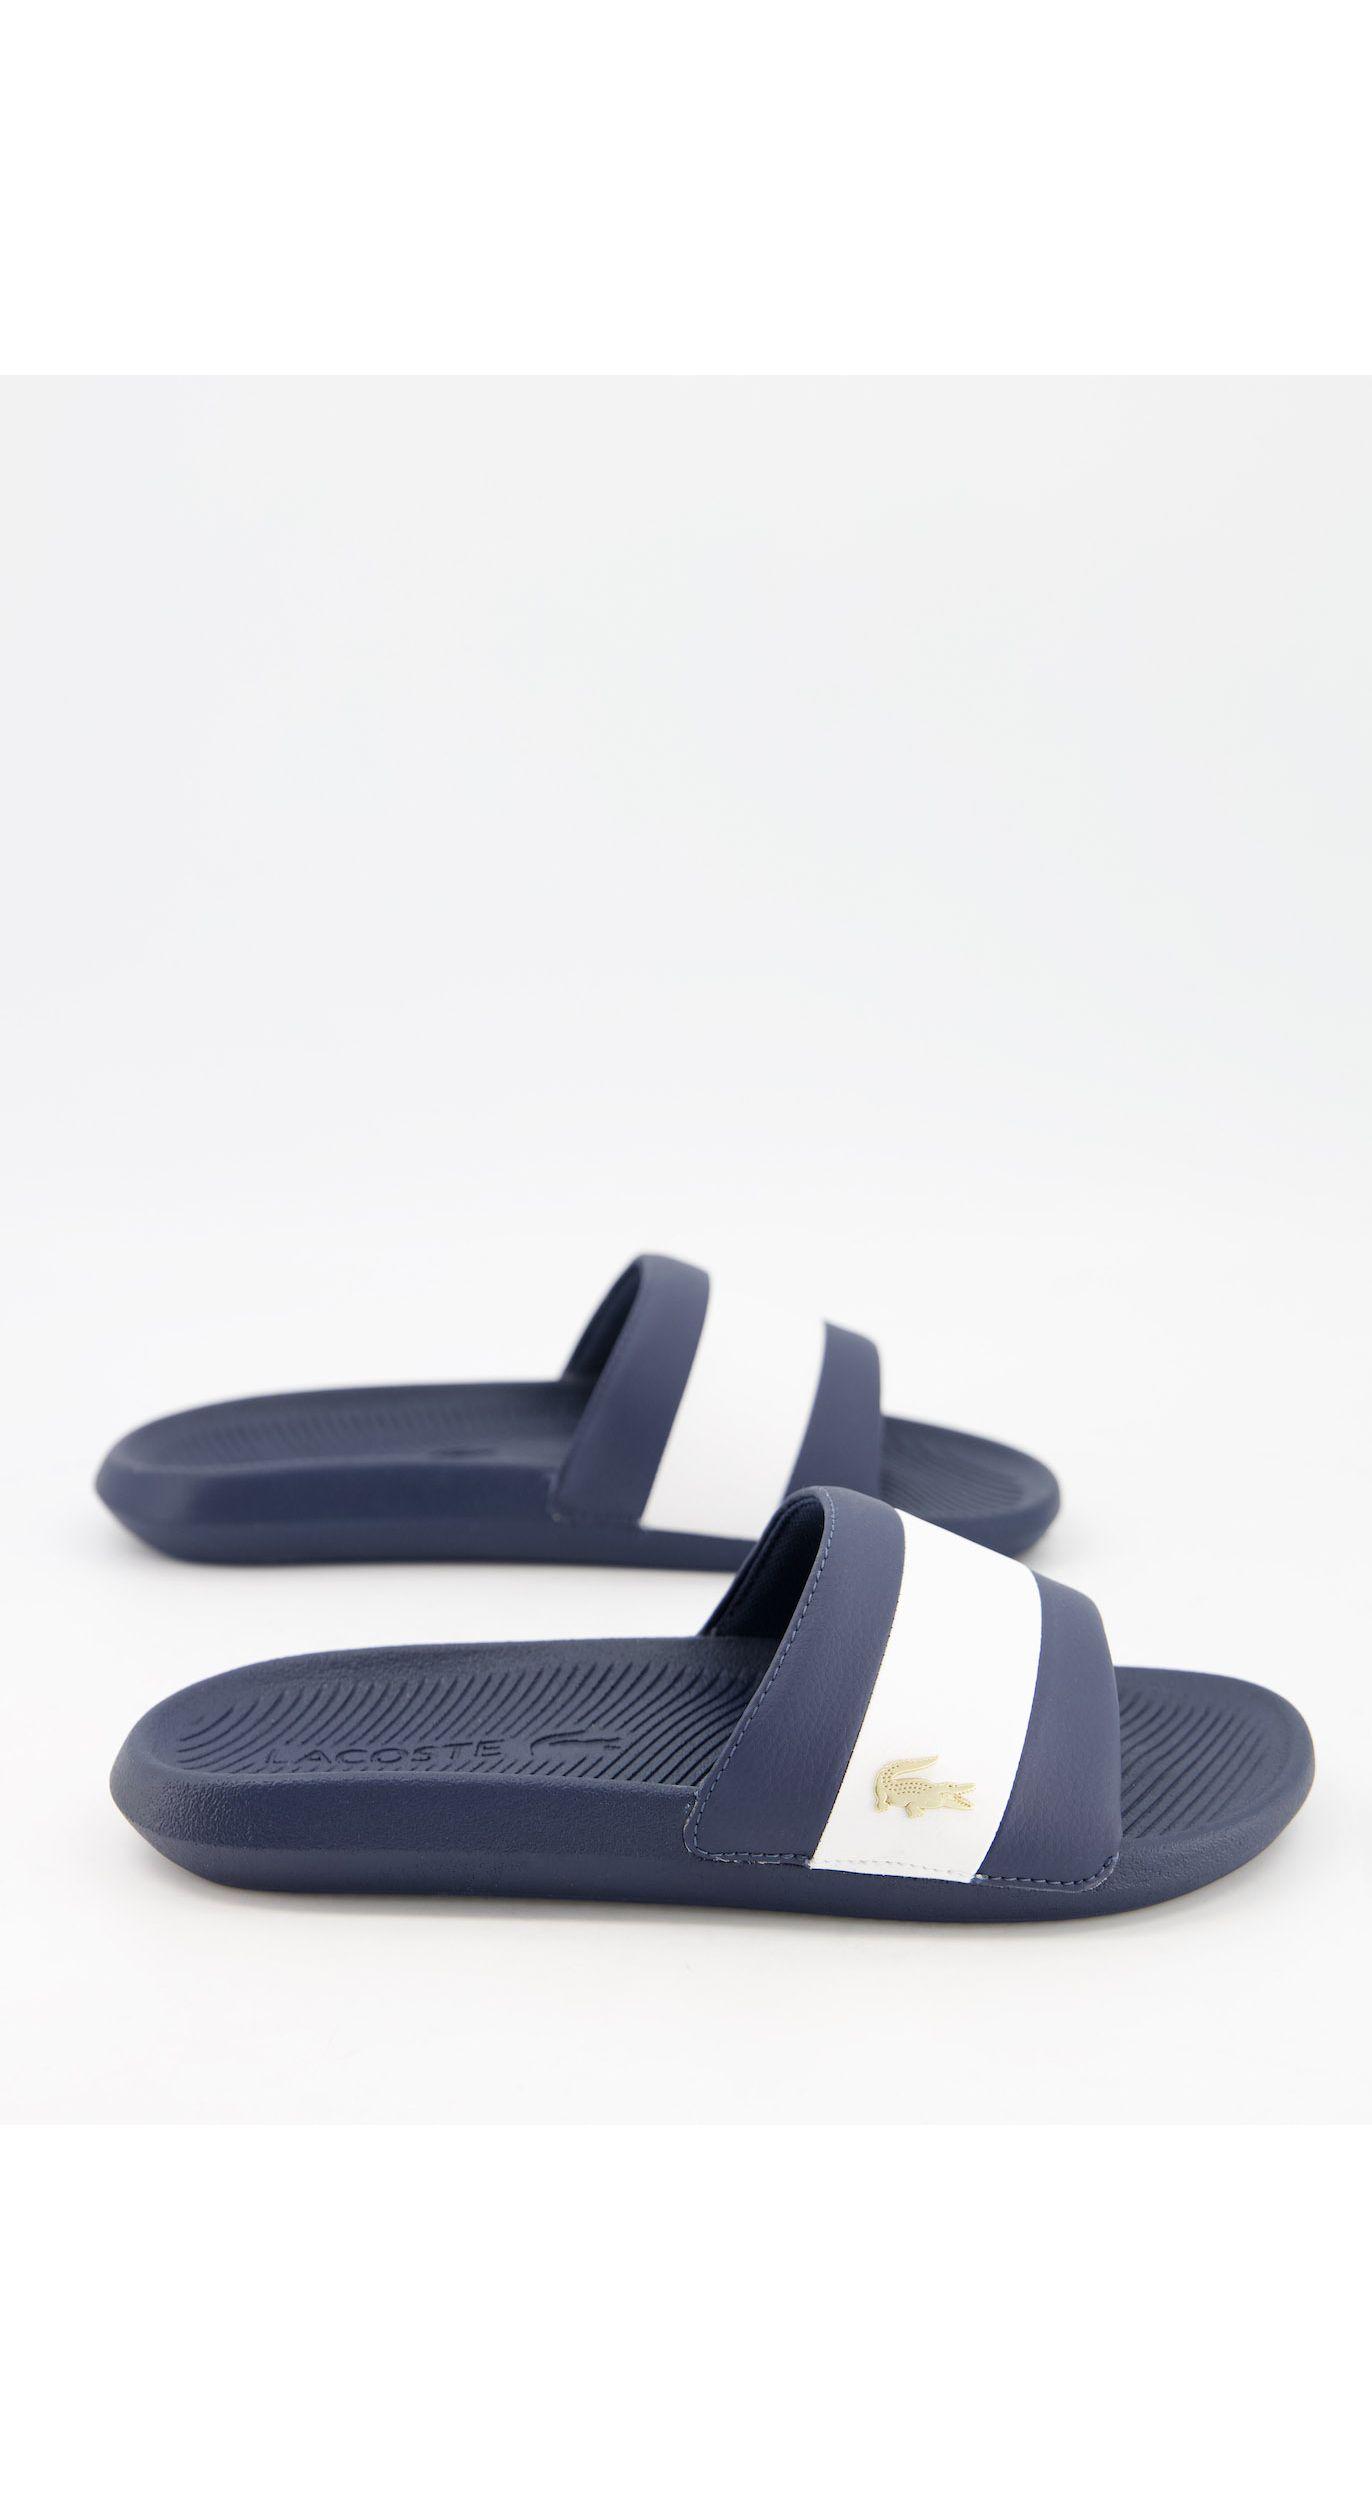 Lacoste Croco Sliders With Gold Croc in Navy (Blue) for Men - Lyst